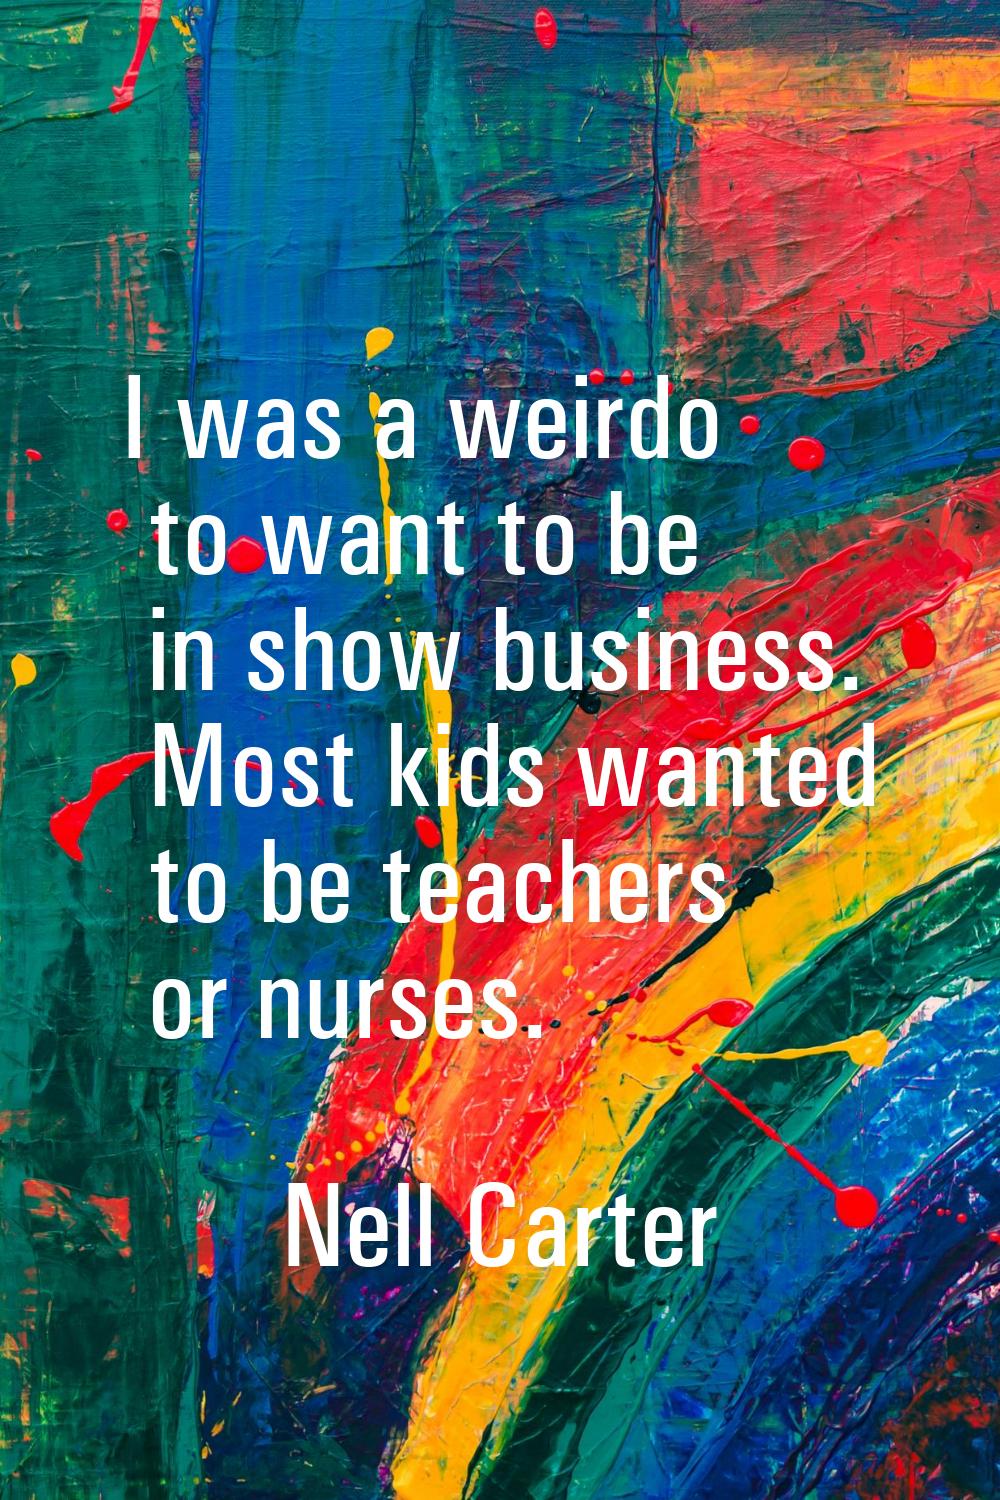 I was a weirdo to want to be in show business. Most kids wanted to be teachers or nurses.